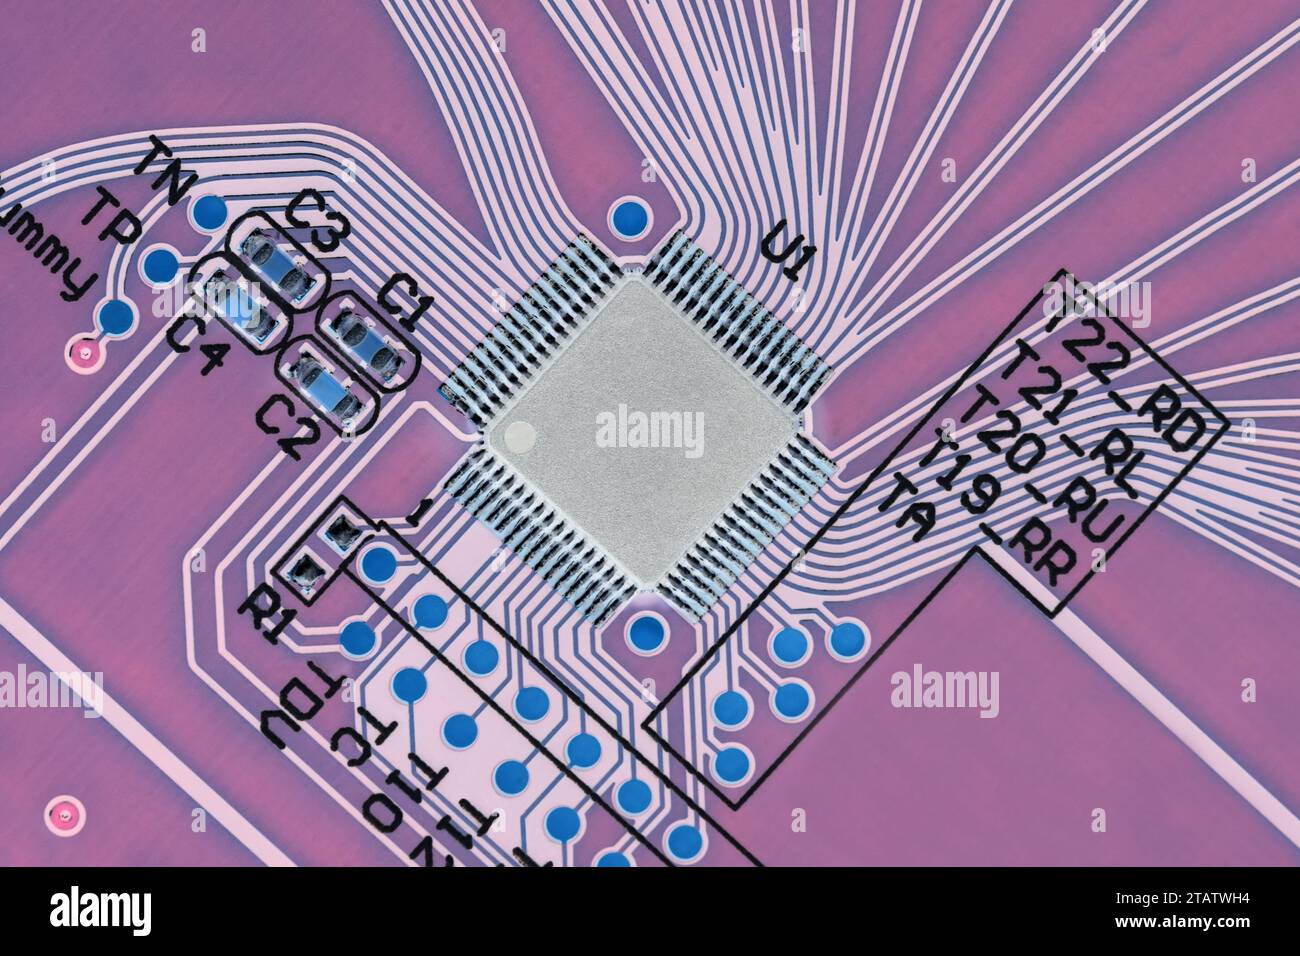 Microprocessor on a printed circuit board, close-up, top view, in inverted colors. Macro photography Stock Photo